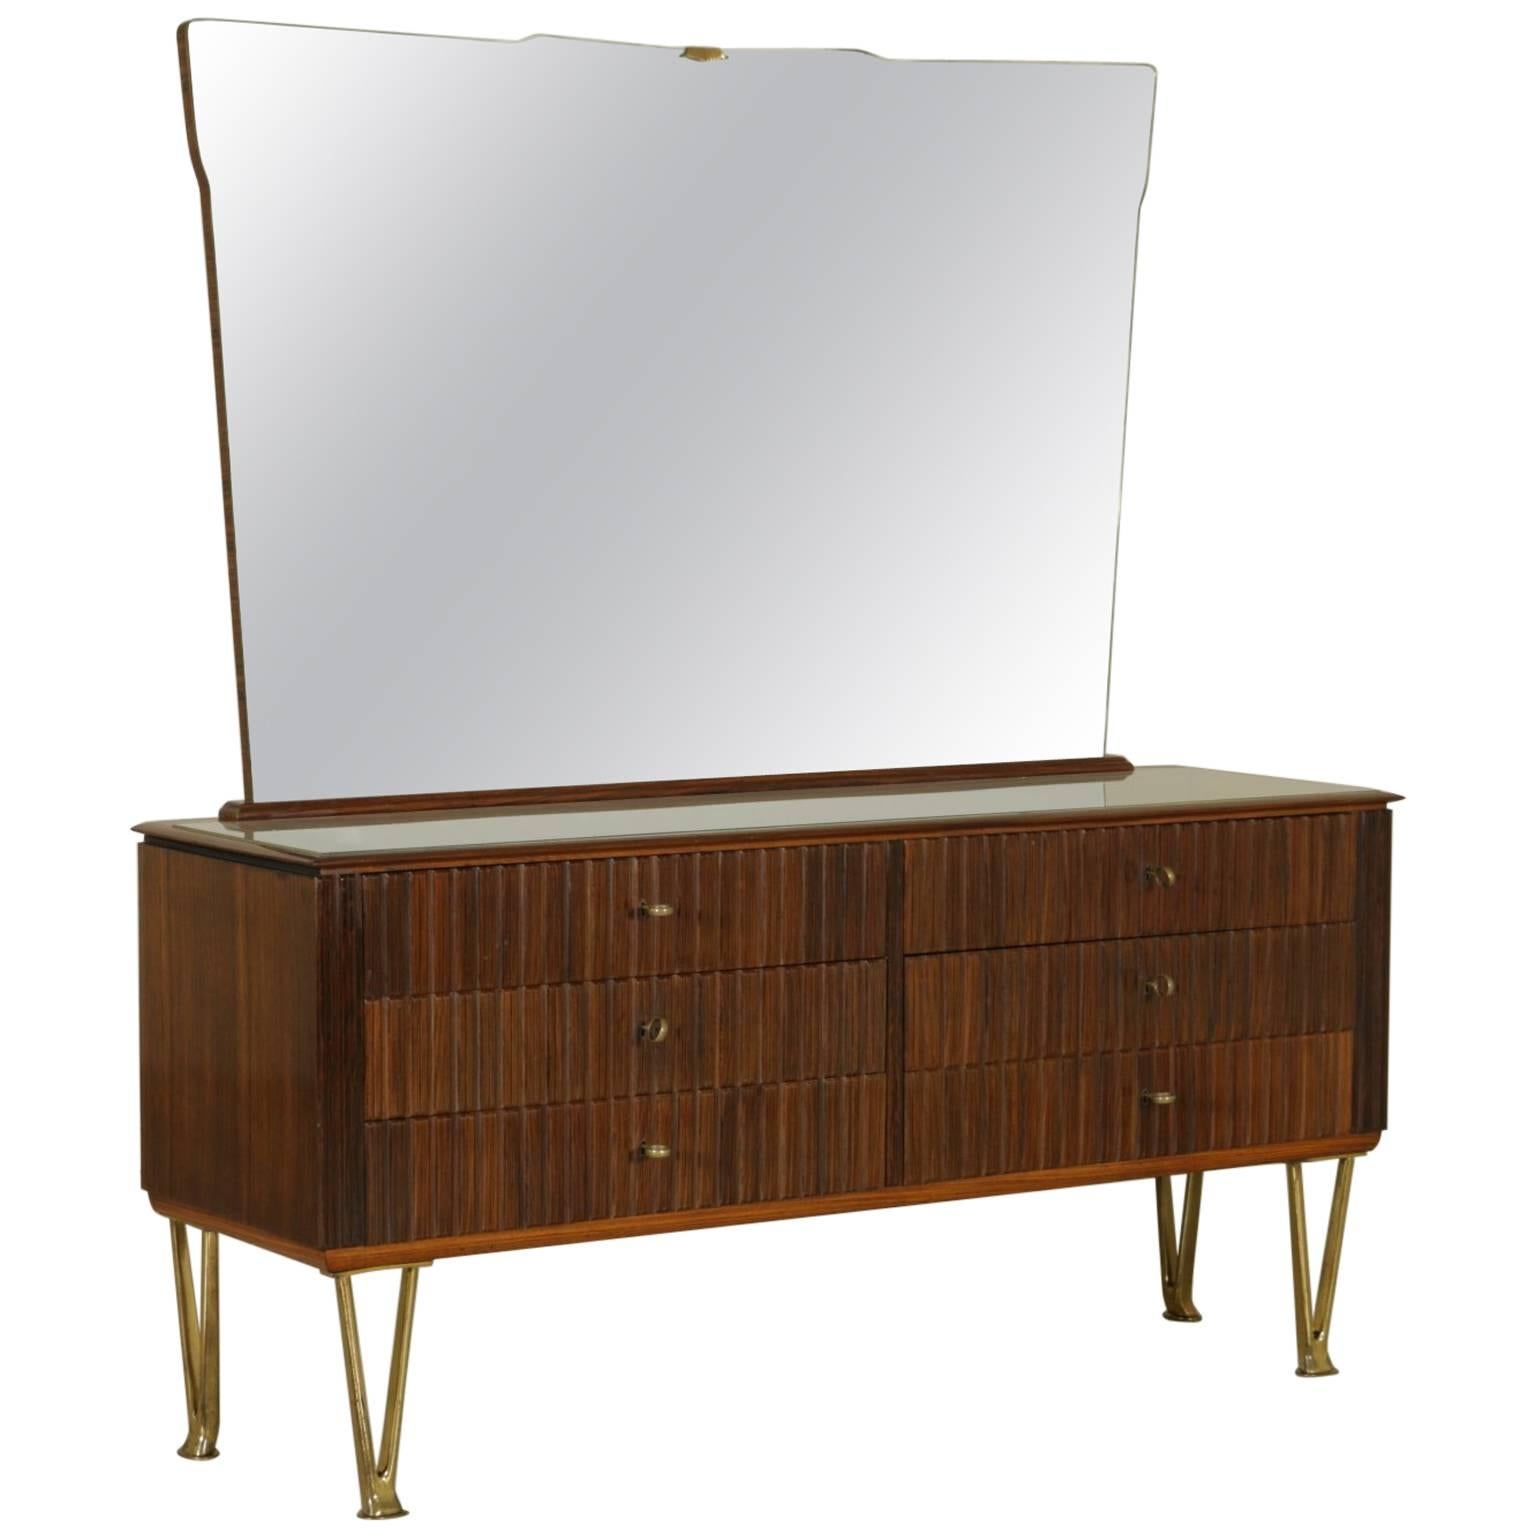 Chest of Drawers with Mirror Rosewood Veneer Casted Brass Glass Top Vintage